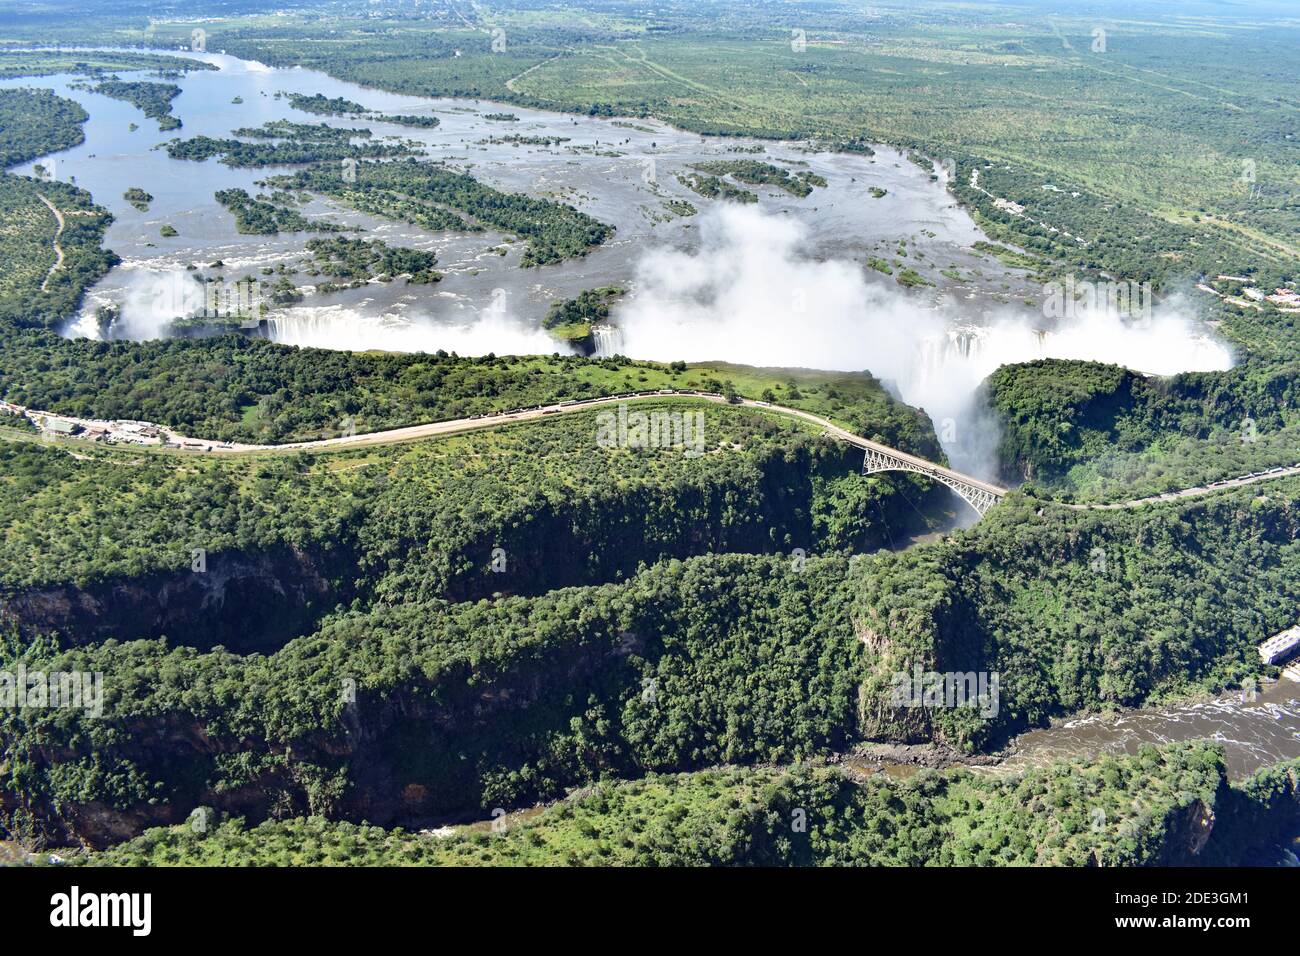 An aerial view of The Smoke That Thunders, Victoria Falls Bridge and the gorges.  Spray rises from the waterfall.  Zimbabwe and Zambia, Africa. Stock Photo